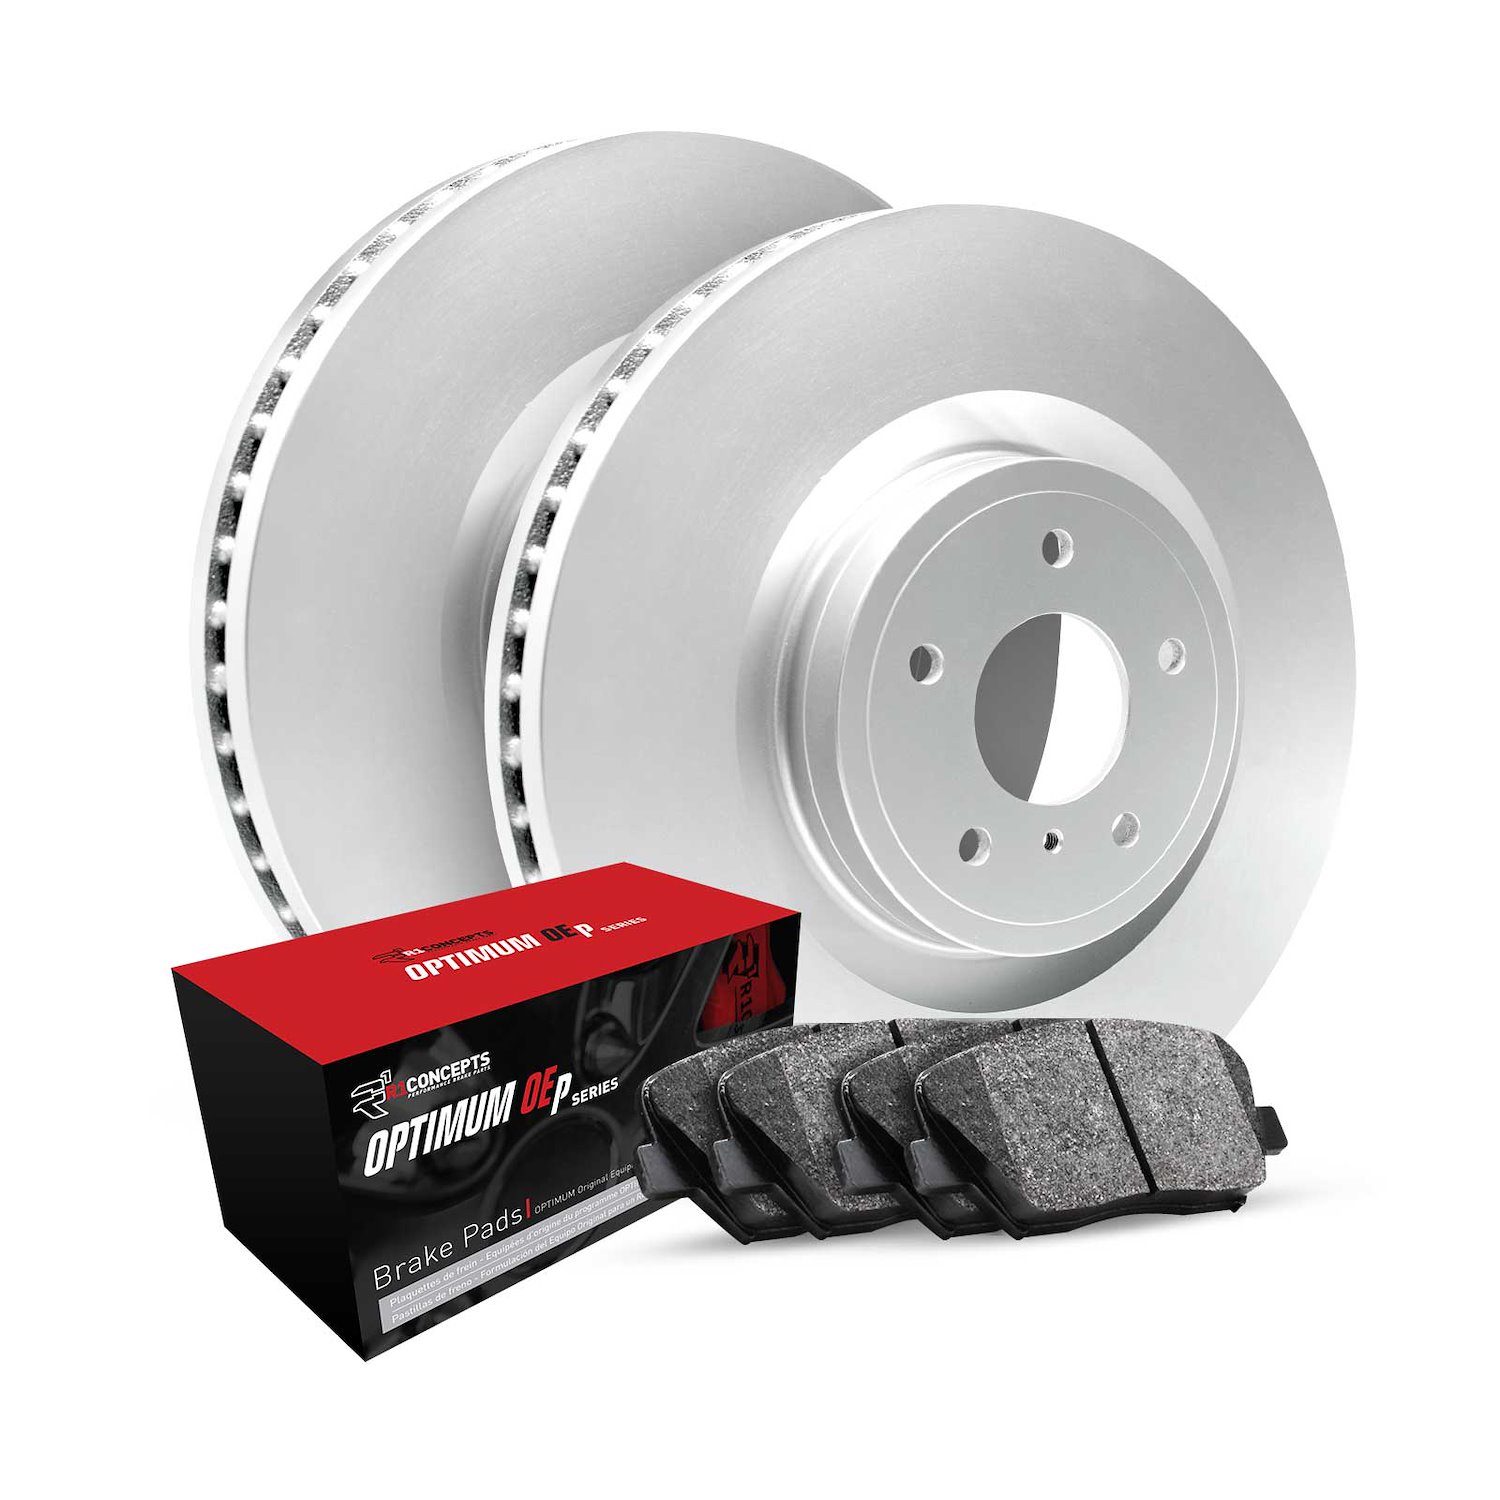 GEO-Carbon Brake Rotor Set w/Optimum OE Pads, Fits Select Fits Multiple Makes/Models, Position: Front